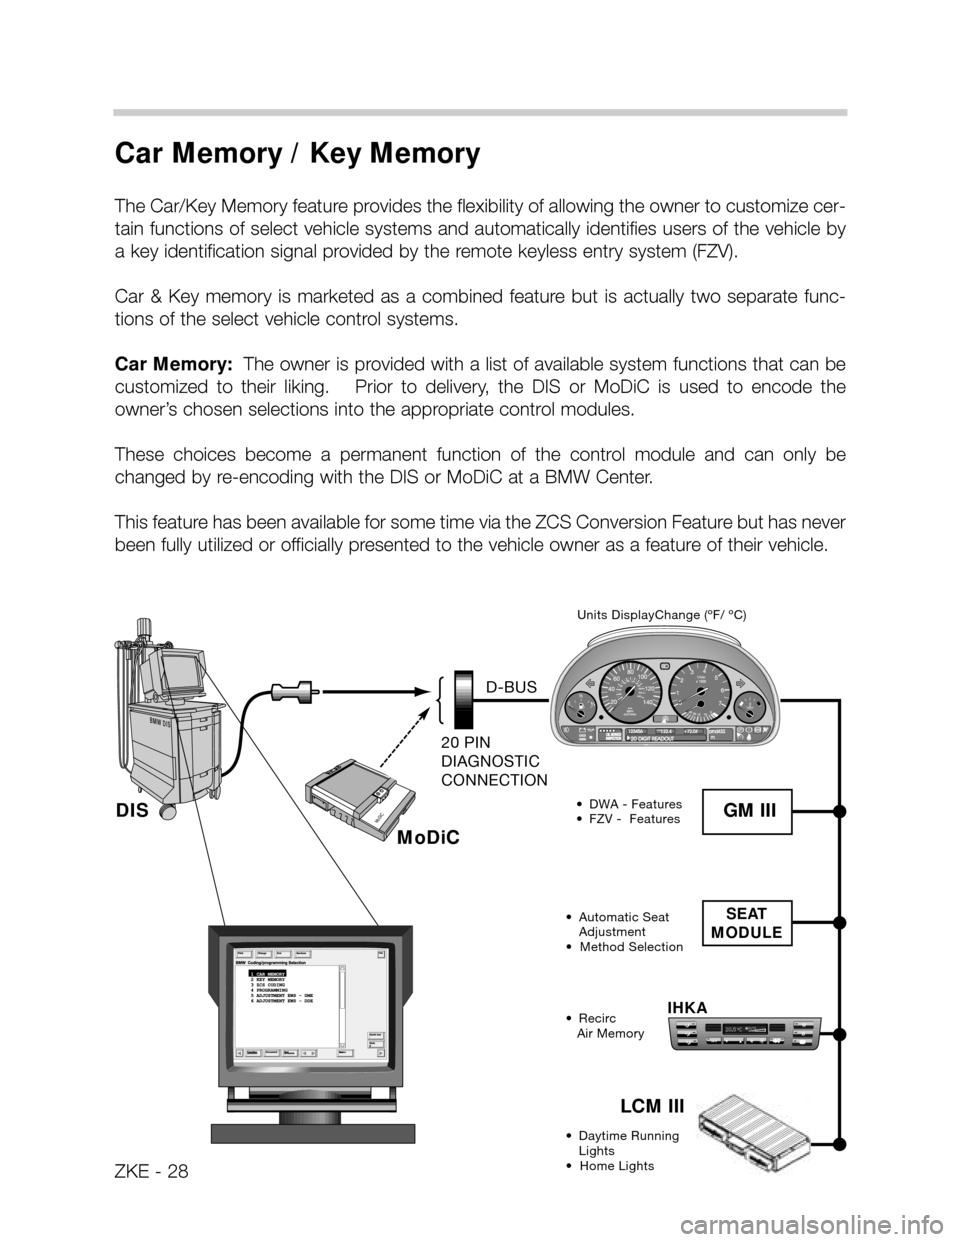 BMW X5 2001 E53 Central Body Electronics Workshop Manual Car Memory / Key Memory 
The Car/Key Memory feature provides the flexibility of allowing the owner to customize cer-
tain functions of select vehicle systems and automatically identifies users of the 